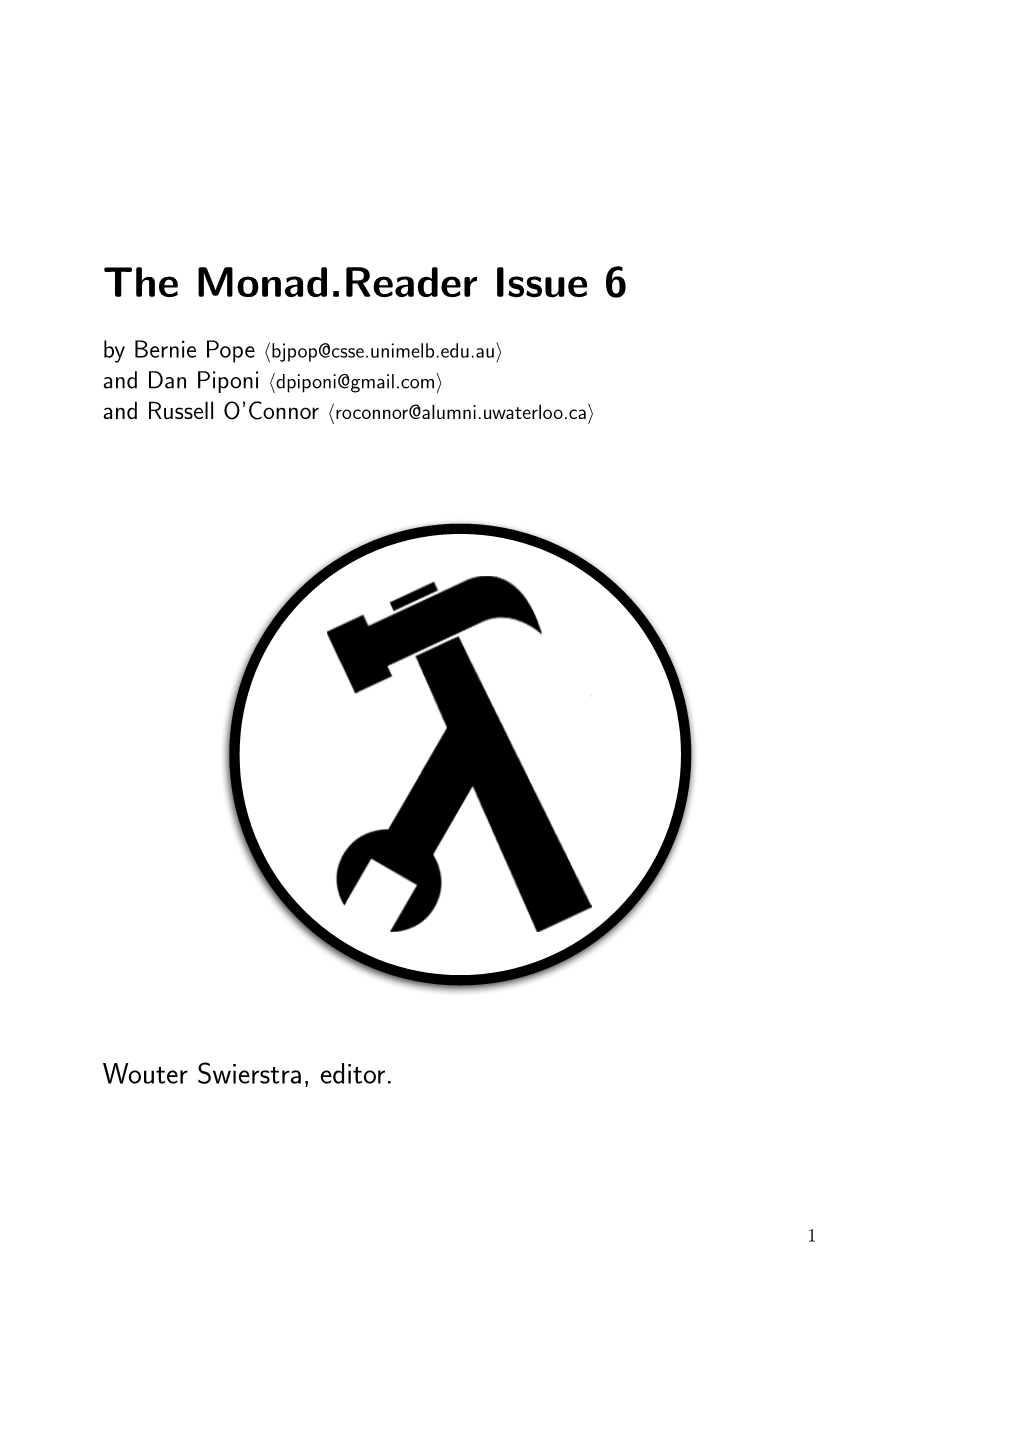 The Monad.Reader Issue 6 by Bernie Pope Hbjpop@Csse.Unimelb.Edu.Aui and Dan Piponi Hdpiponi@Gmail.Comi and Russell O’Connor Hroconnor@Alumni.Uwaterloo.Cai